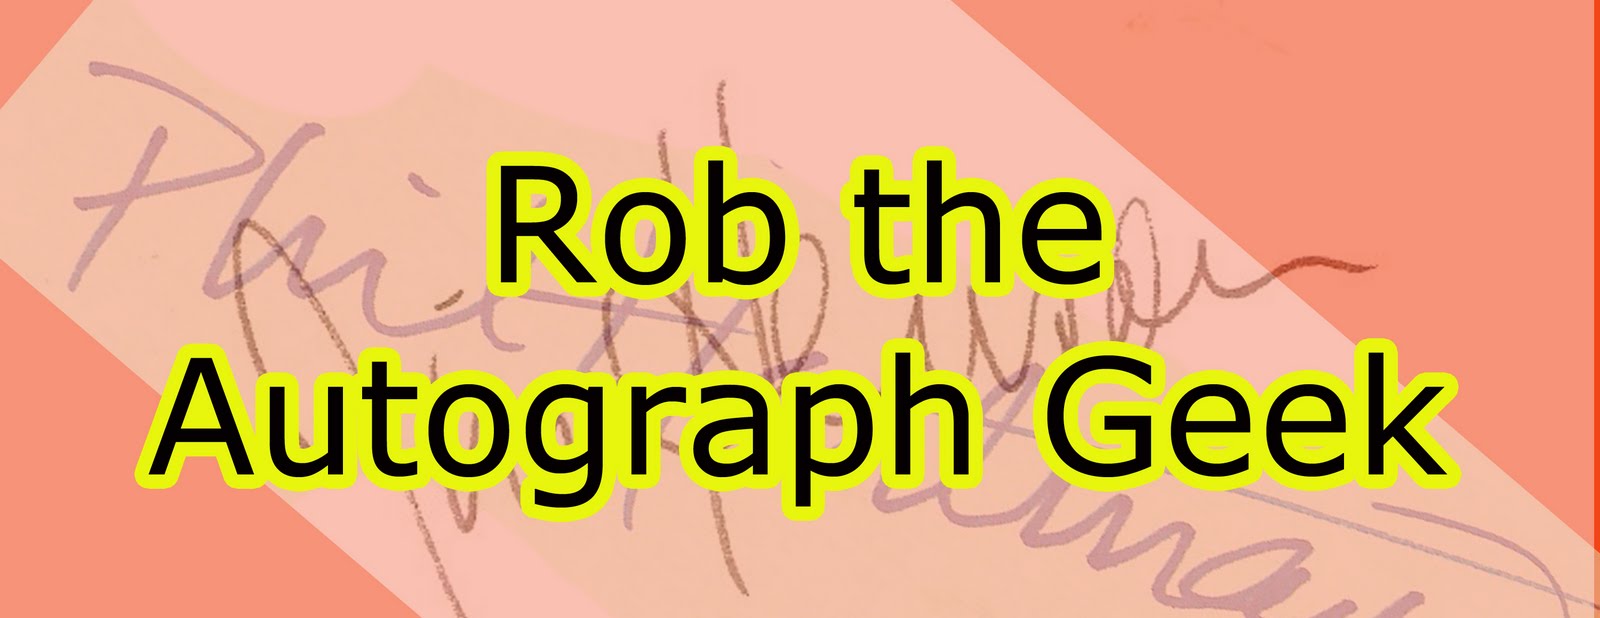 Rob The Autograph Geek